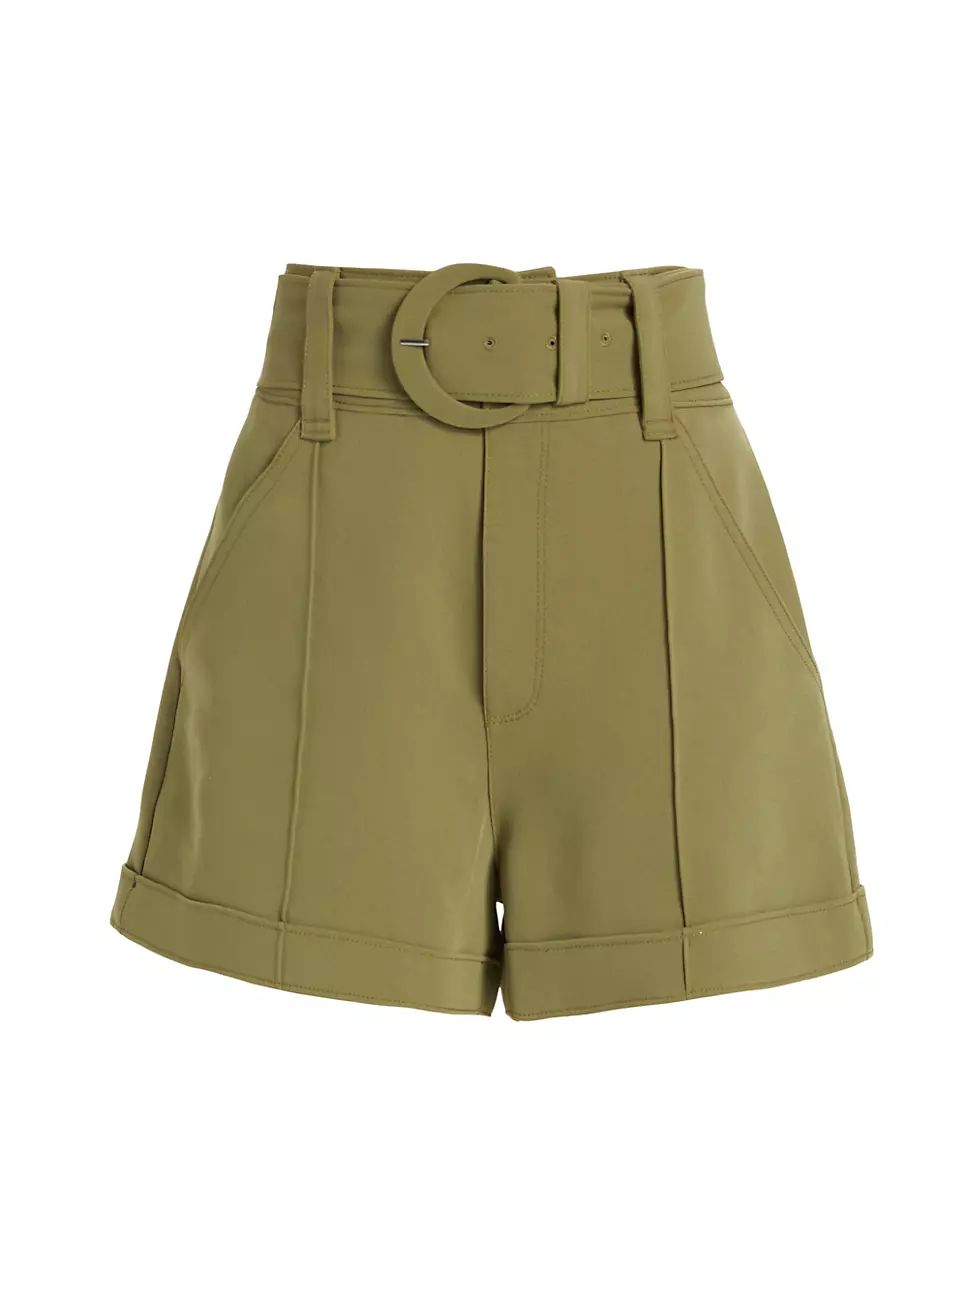 Aldi Belted High-Waisted Shorts | Saks Fifth Avenue